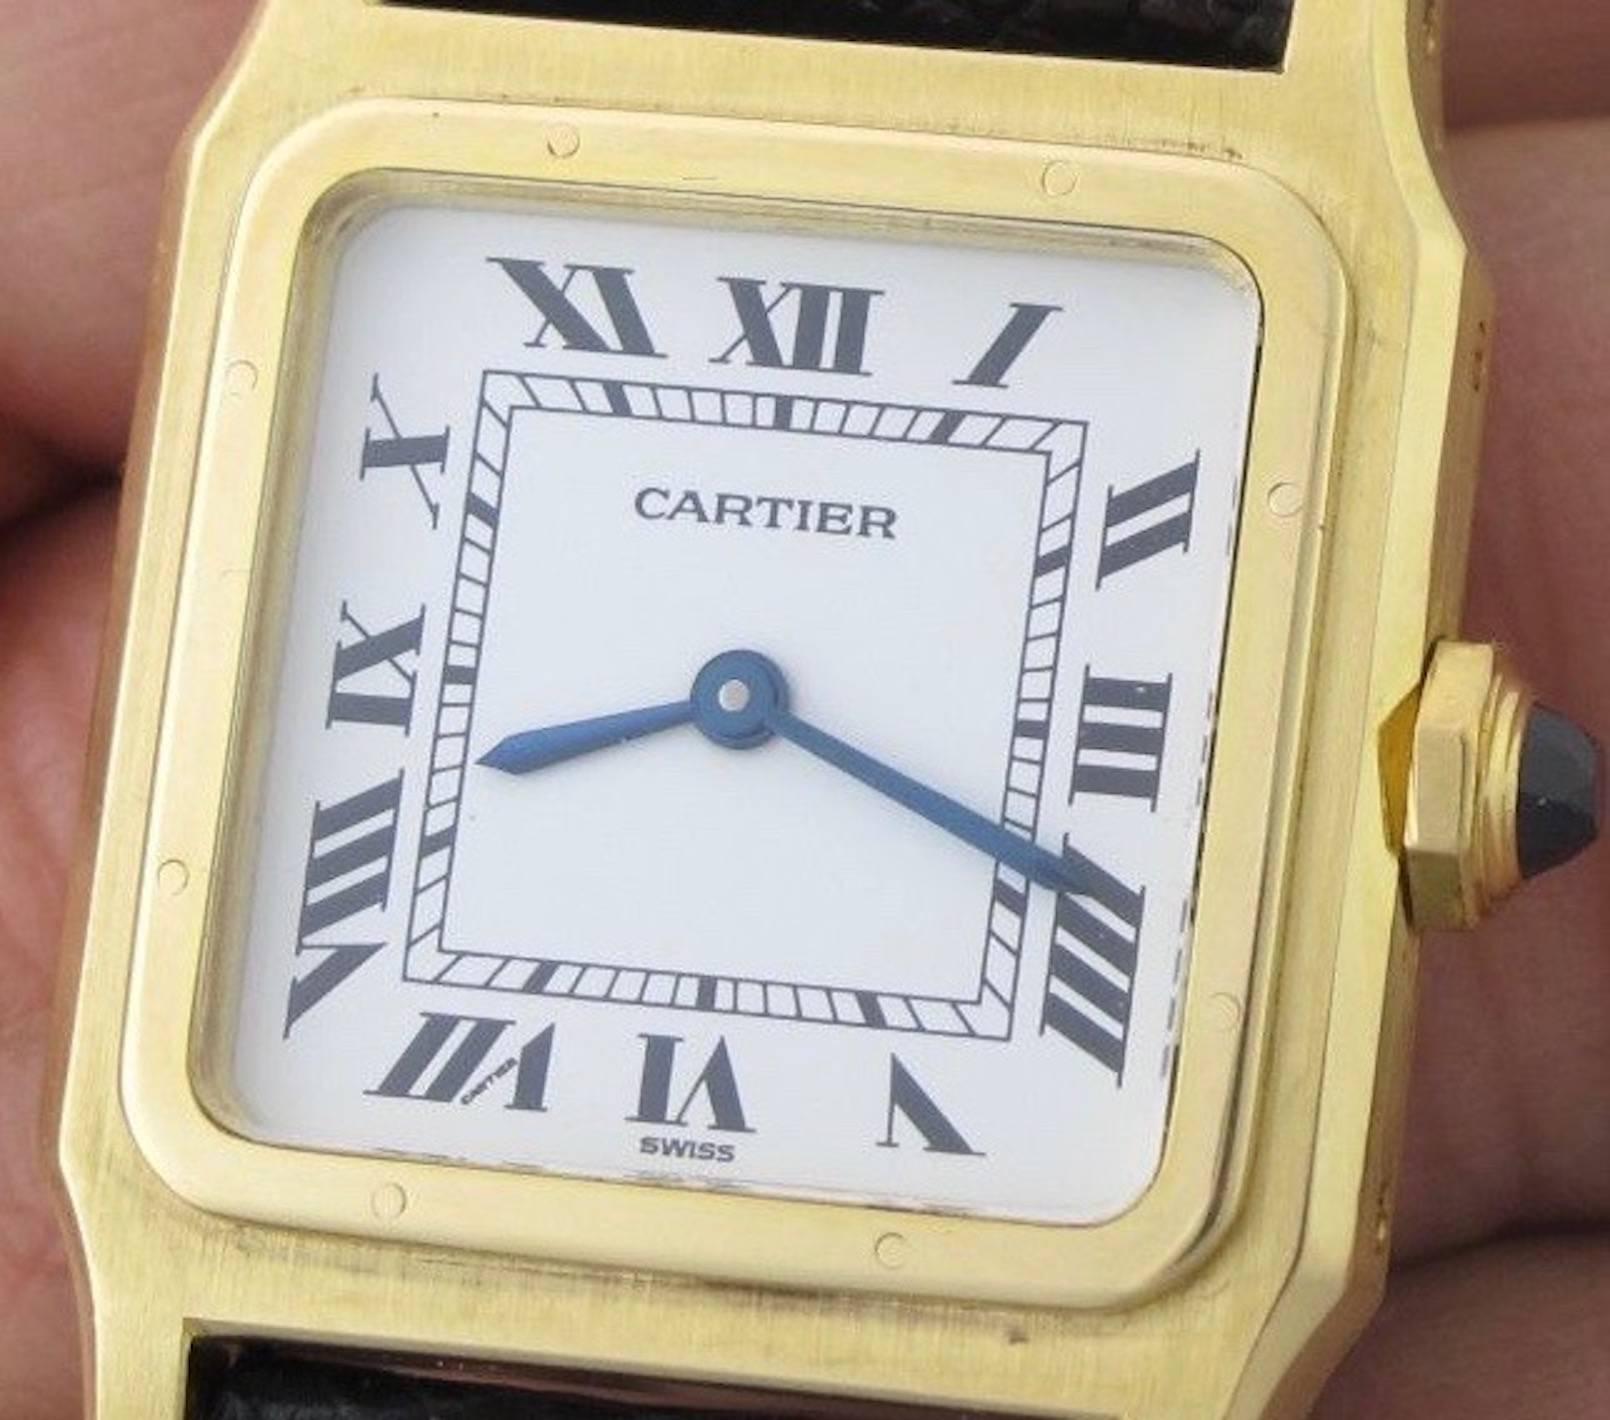 Cartier Santos Pre Owned Midsize Manual Winding wrist watch. White Dial with black Roman numerals. 18k Yellow Gold square style case with Blue Sapphire cabachon setting crown (27x36mm). Dark maroon strap with 18k Yellow Gold Cartier deployant clasp.